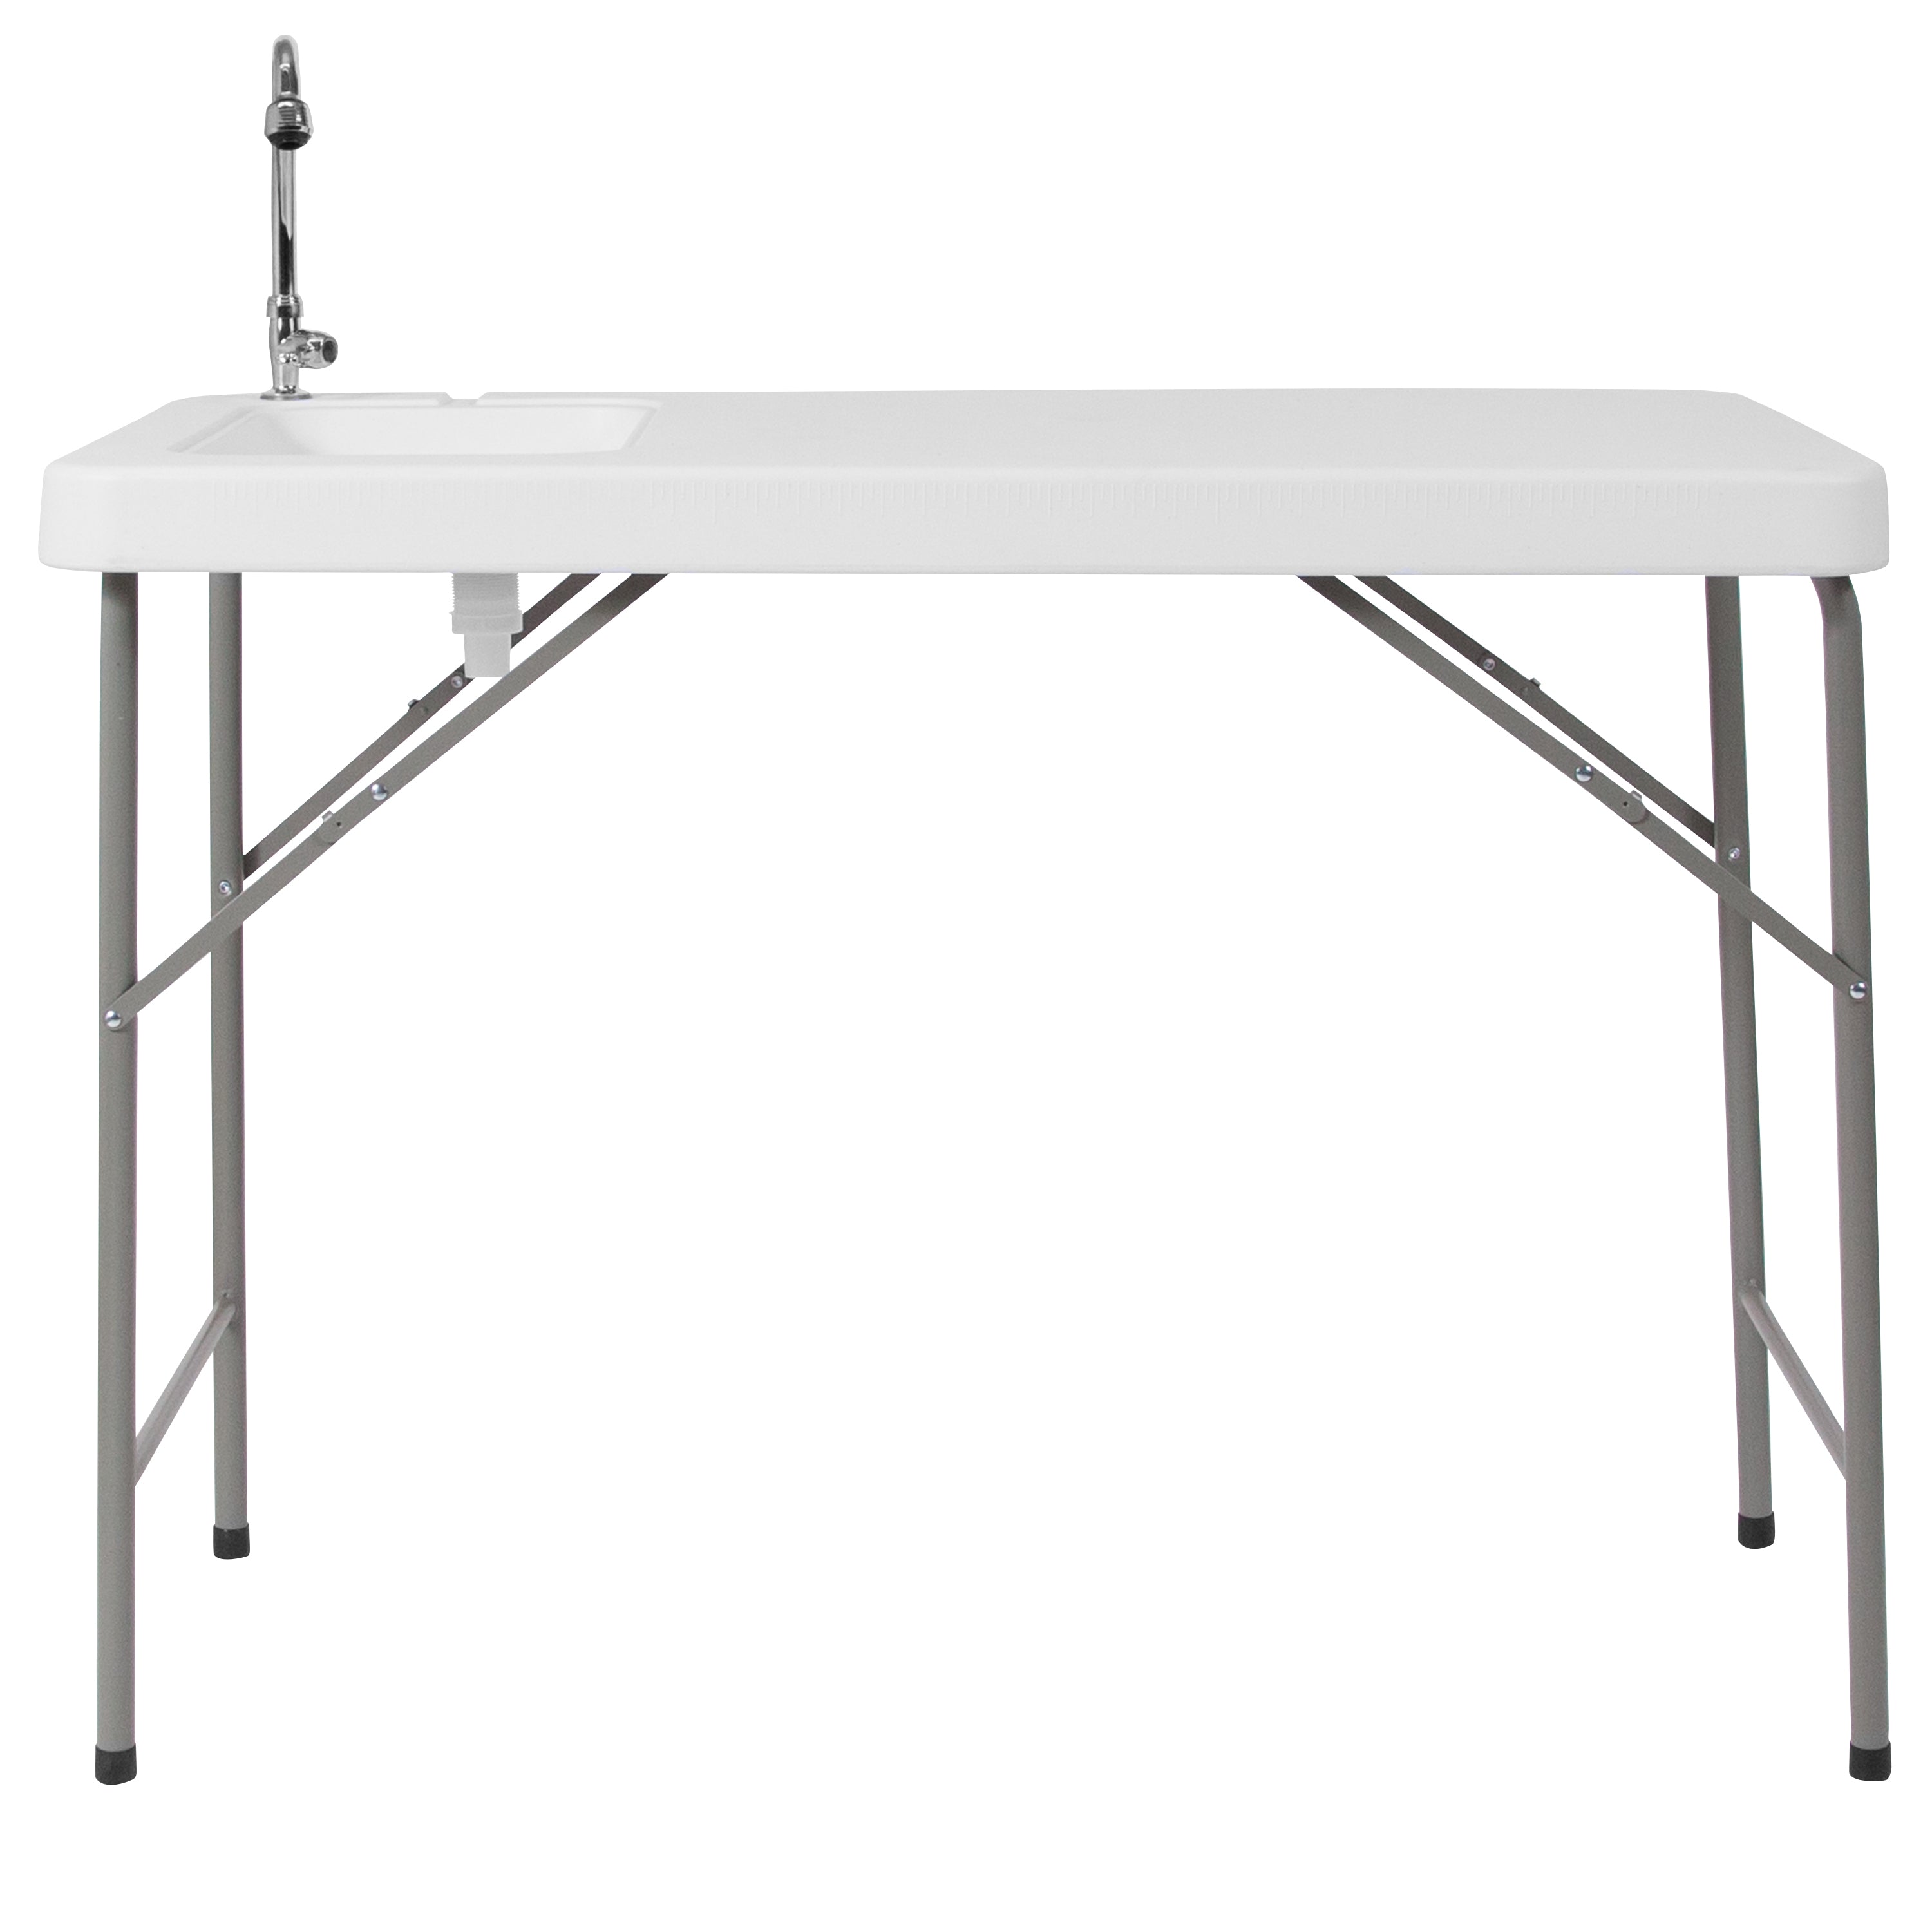 4-Foot Portable Fish Cleaning Table / Outdoor Camping Table and Sink-Rectangular Plastic Folding Table-Flash Furniture-Wall2Wall Furnishings